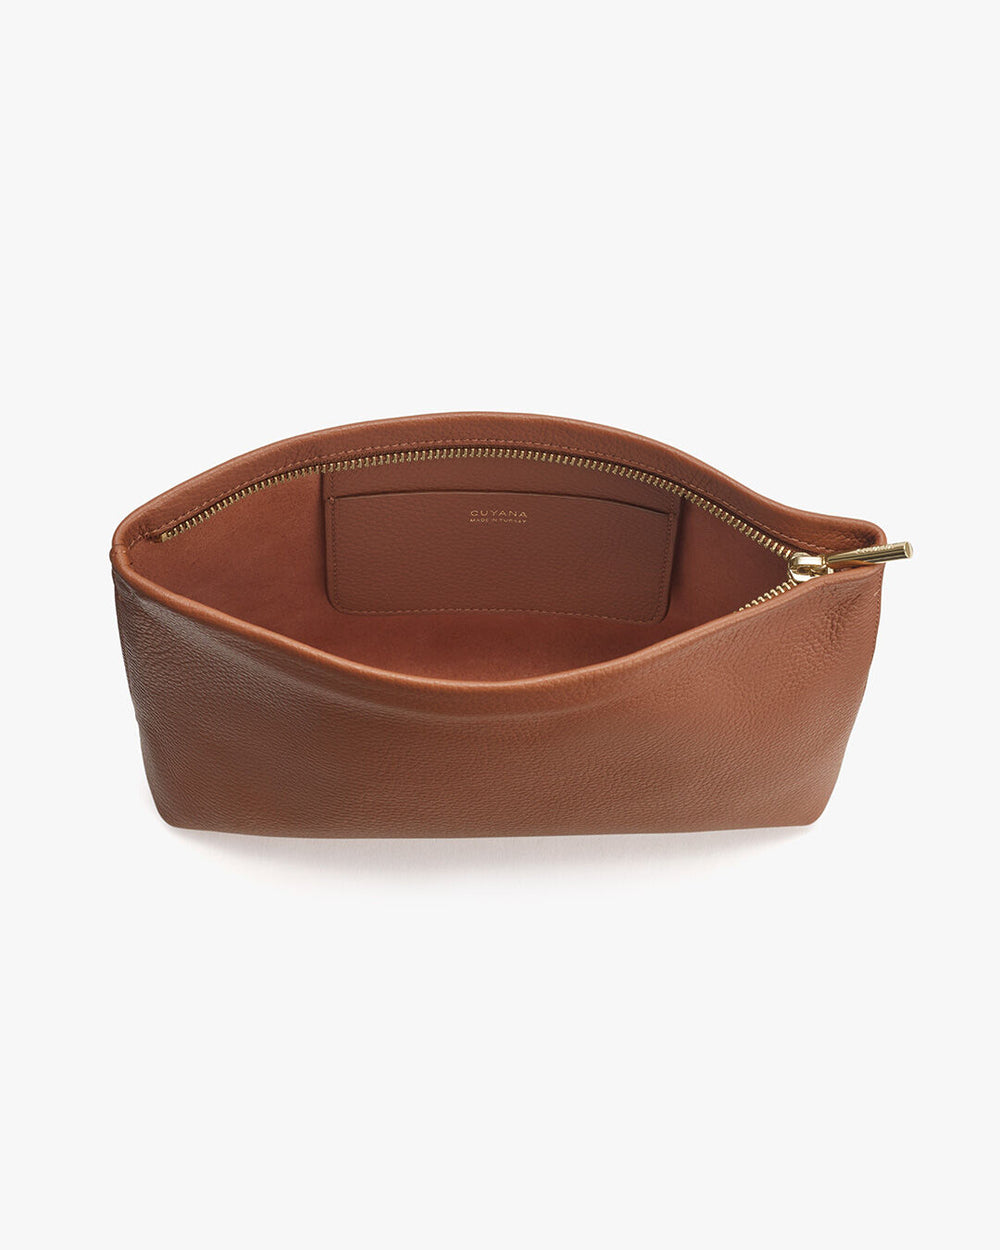 Open leather pouch with zipper on a plain background.